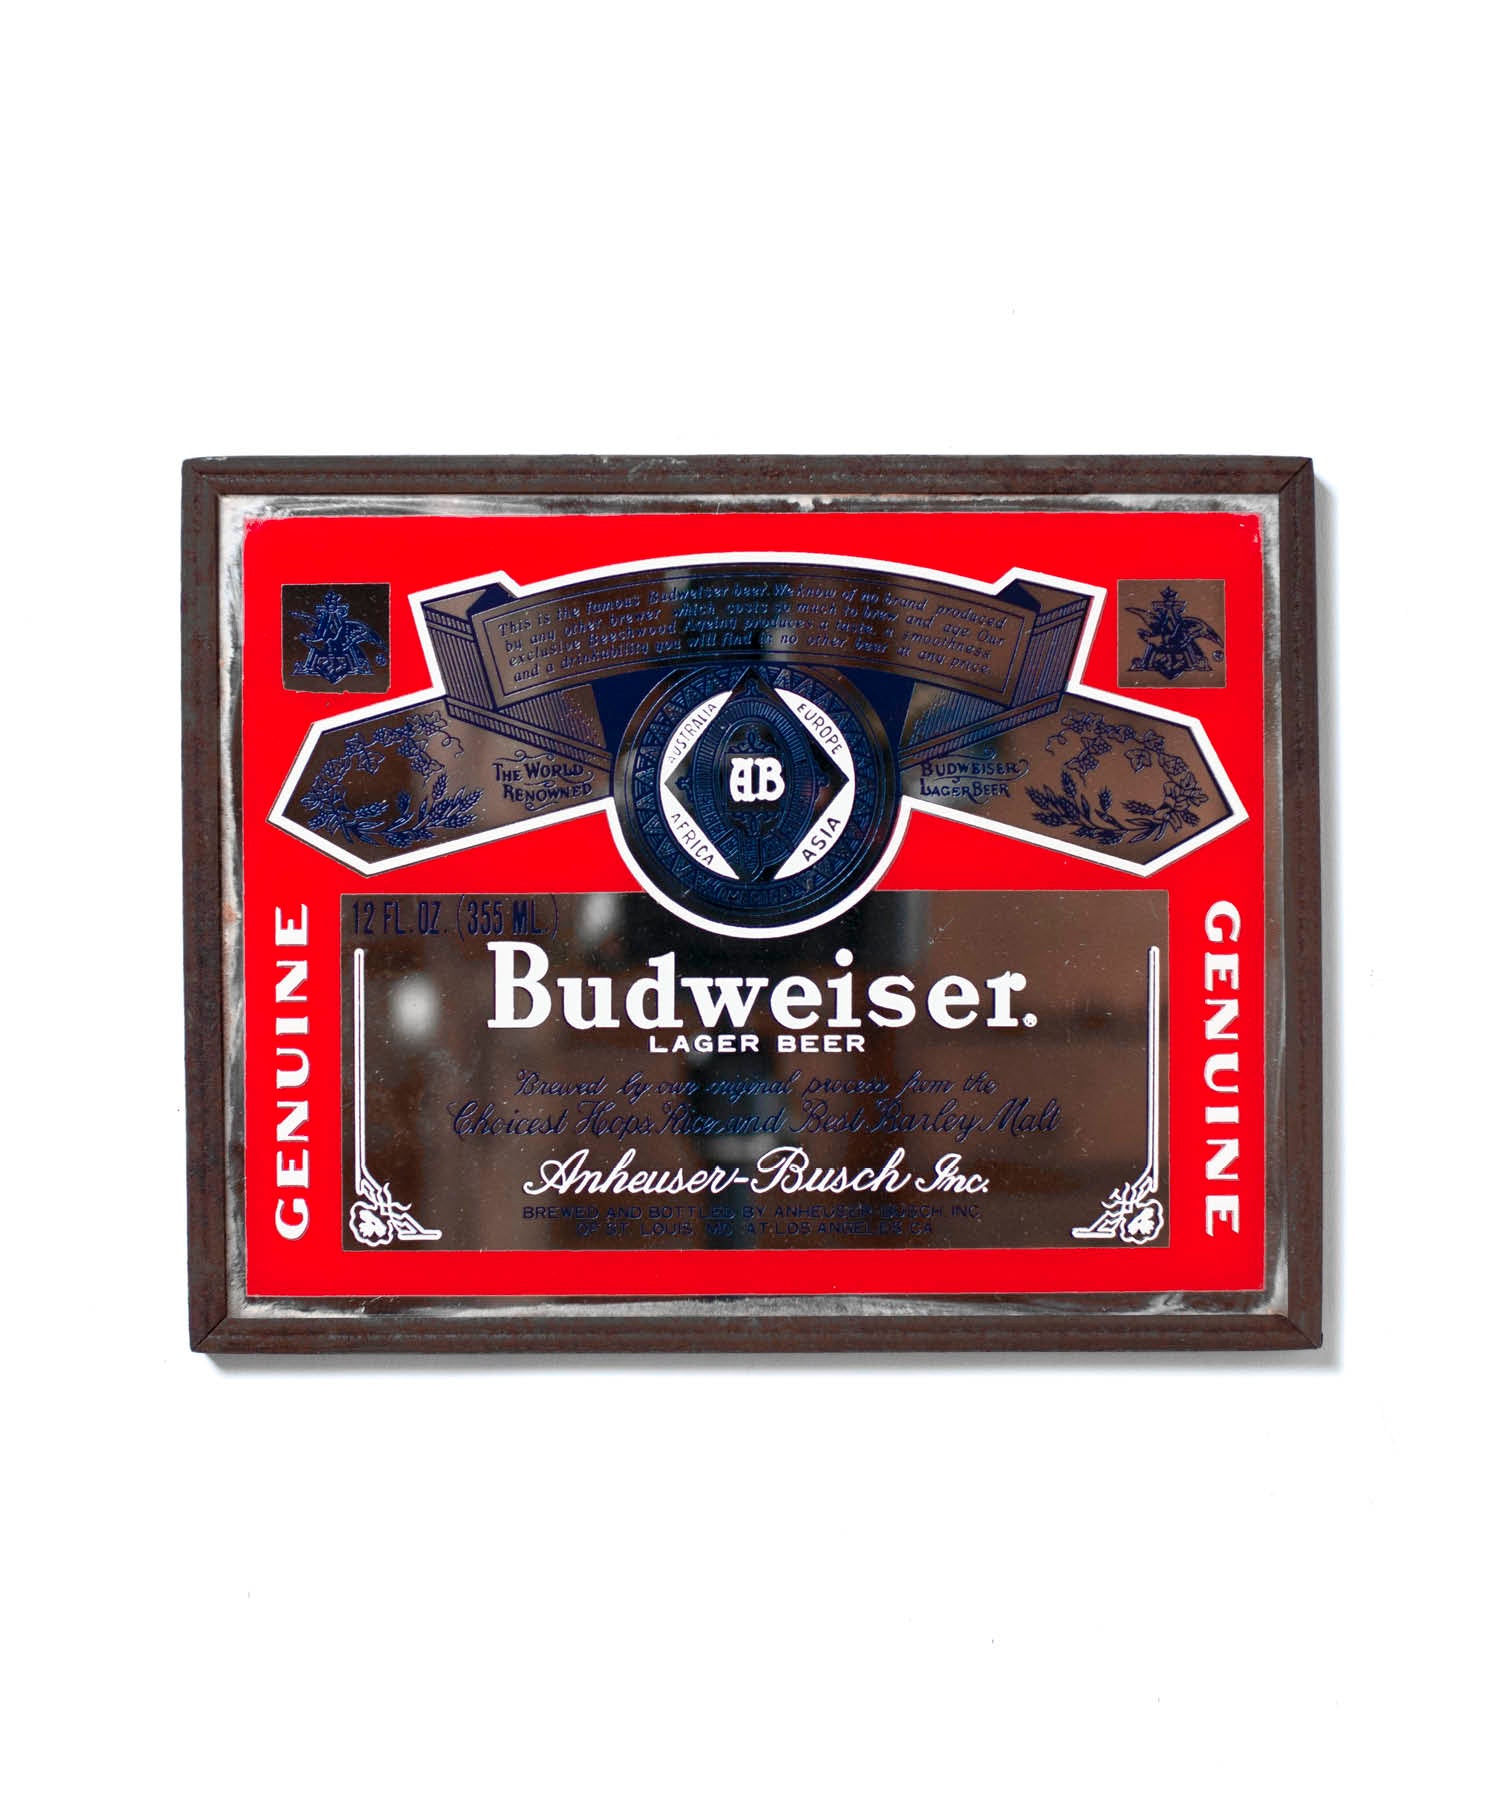 Vintage Object : Budweiserの鏡 | LIKE THIS SHOP